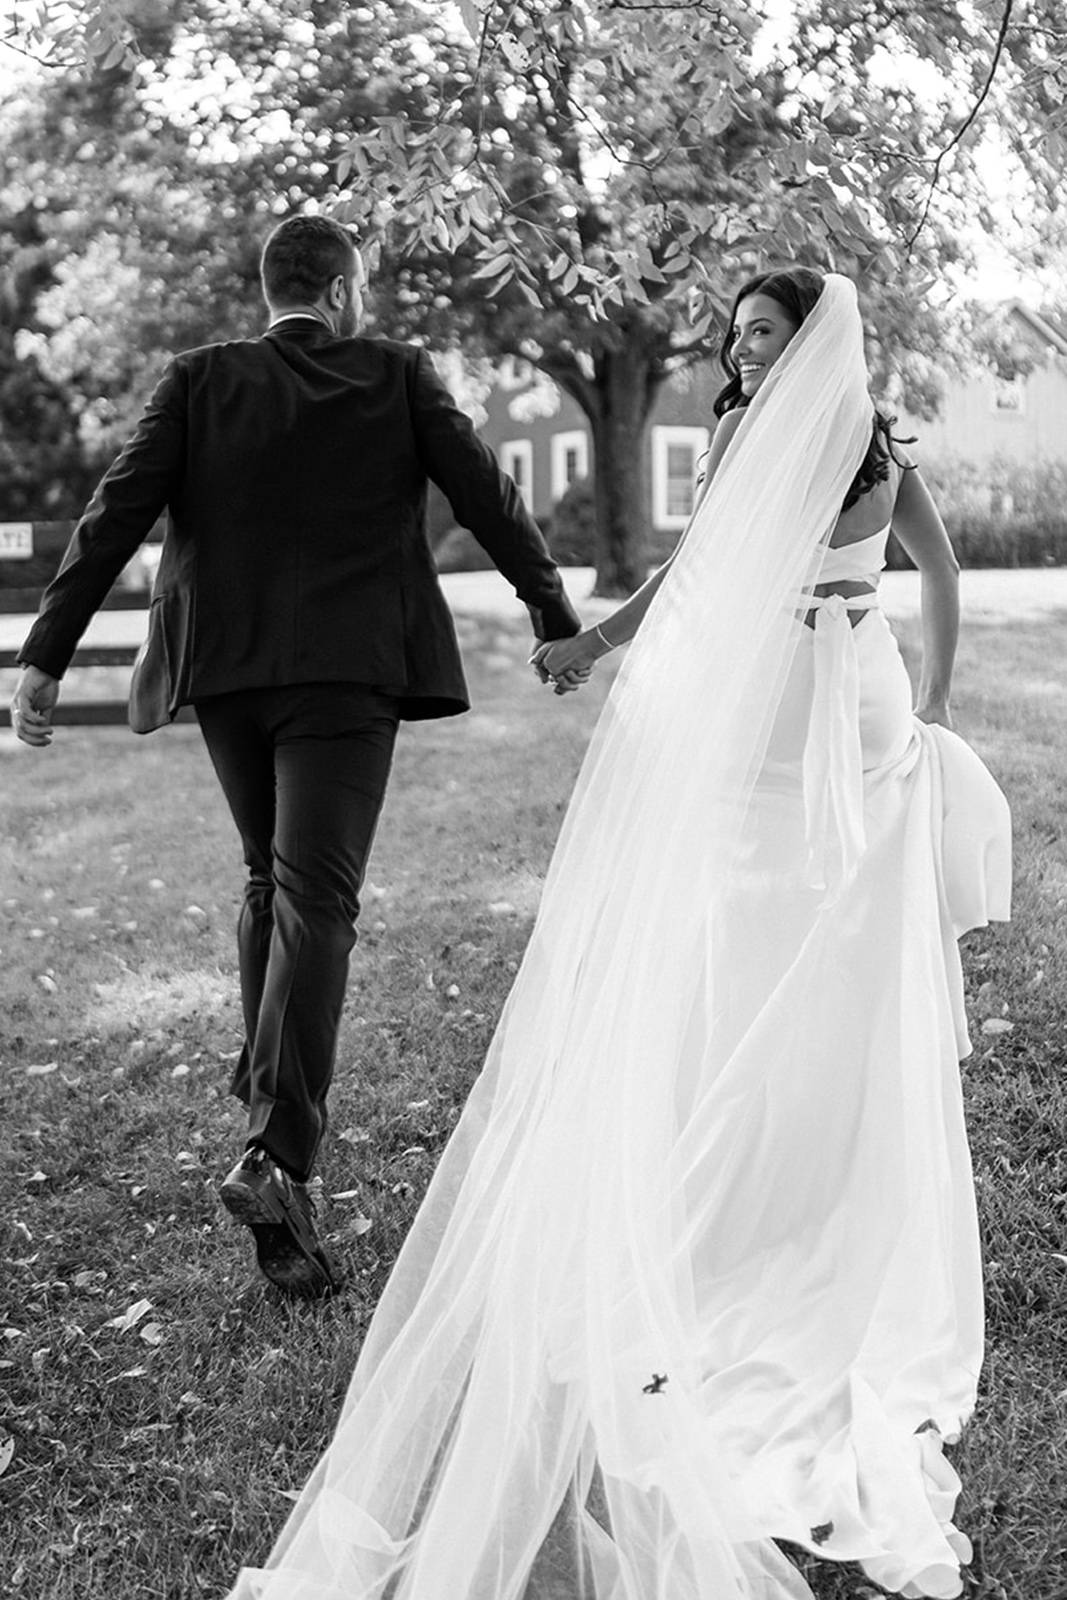 Bride and groom holding hands and walking together